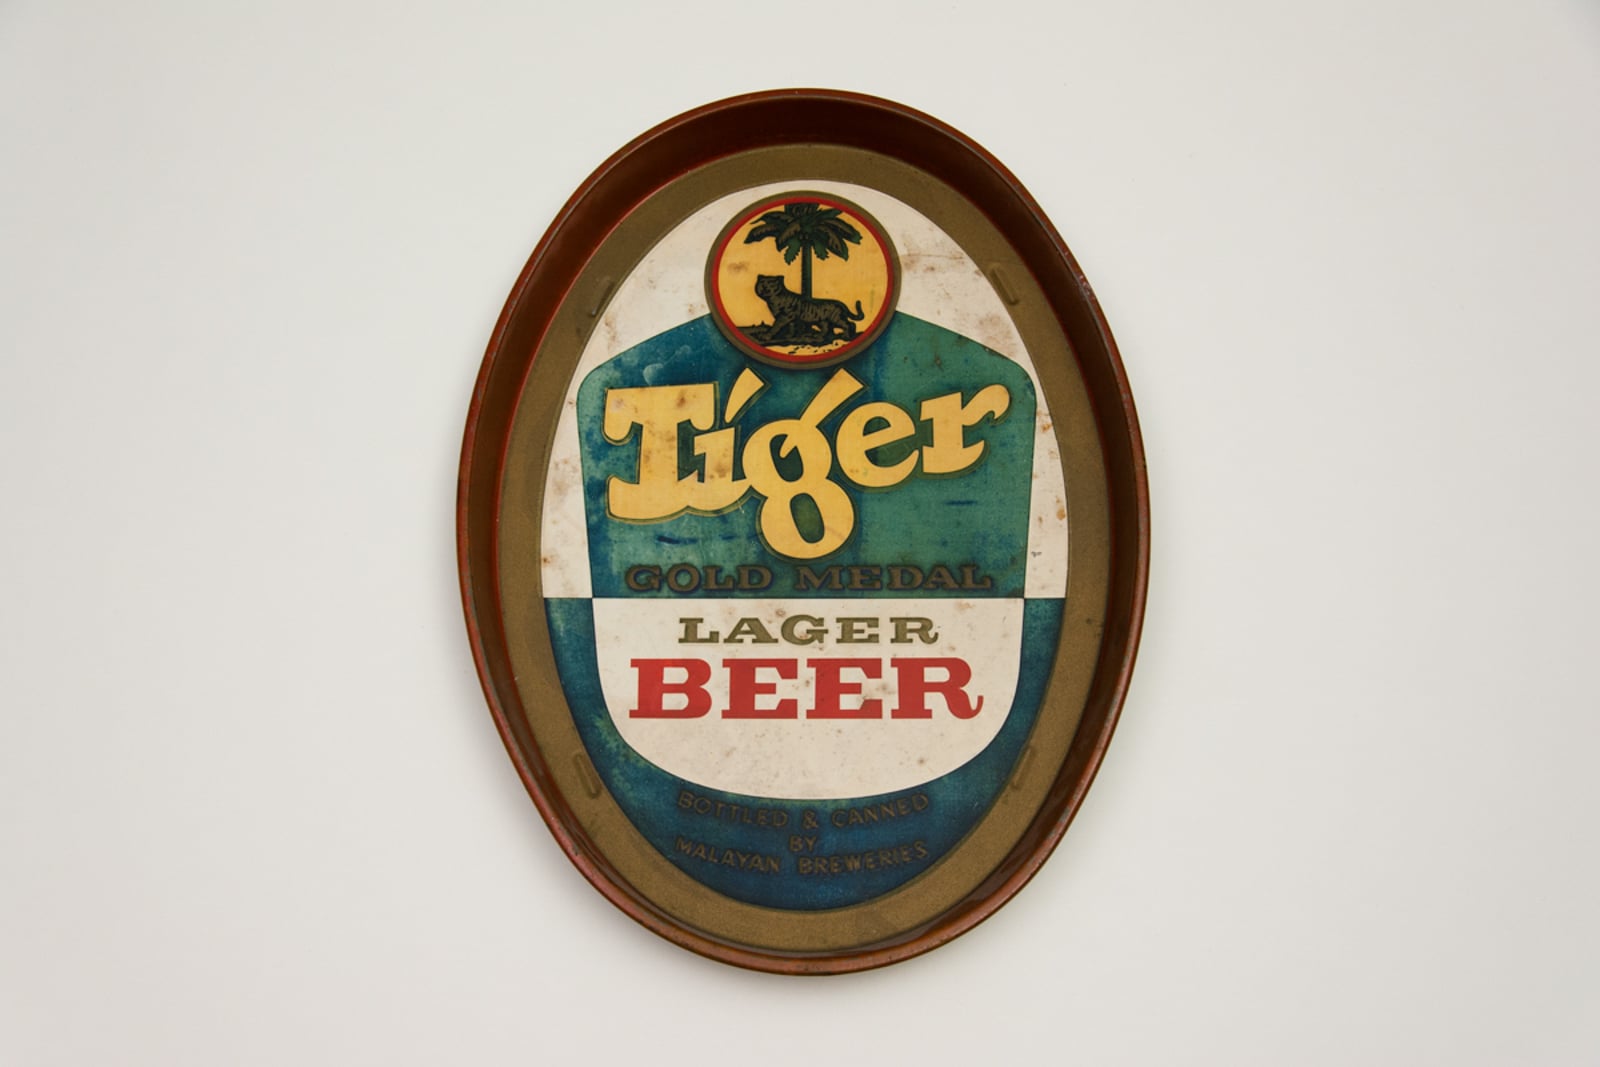 Tiger Lager Beer Oval Serving Tray